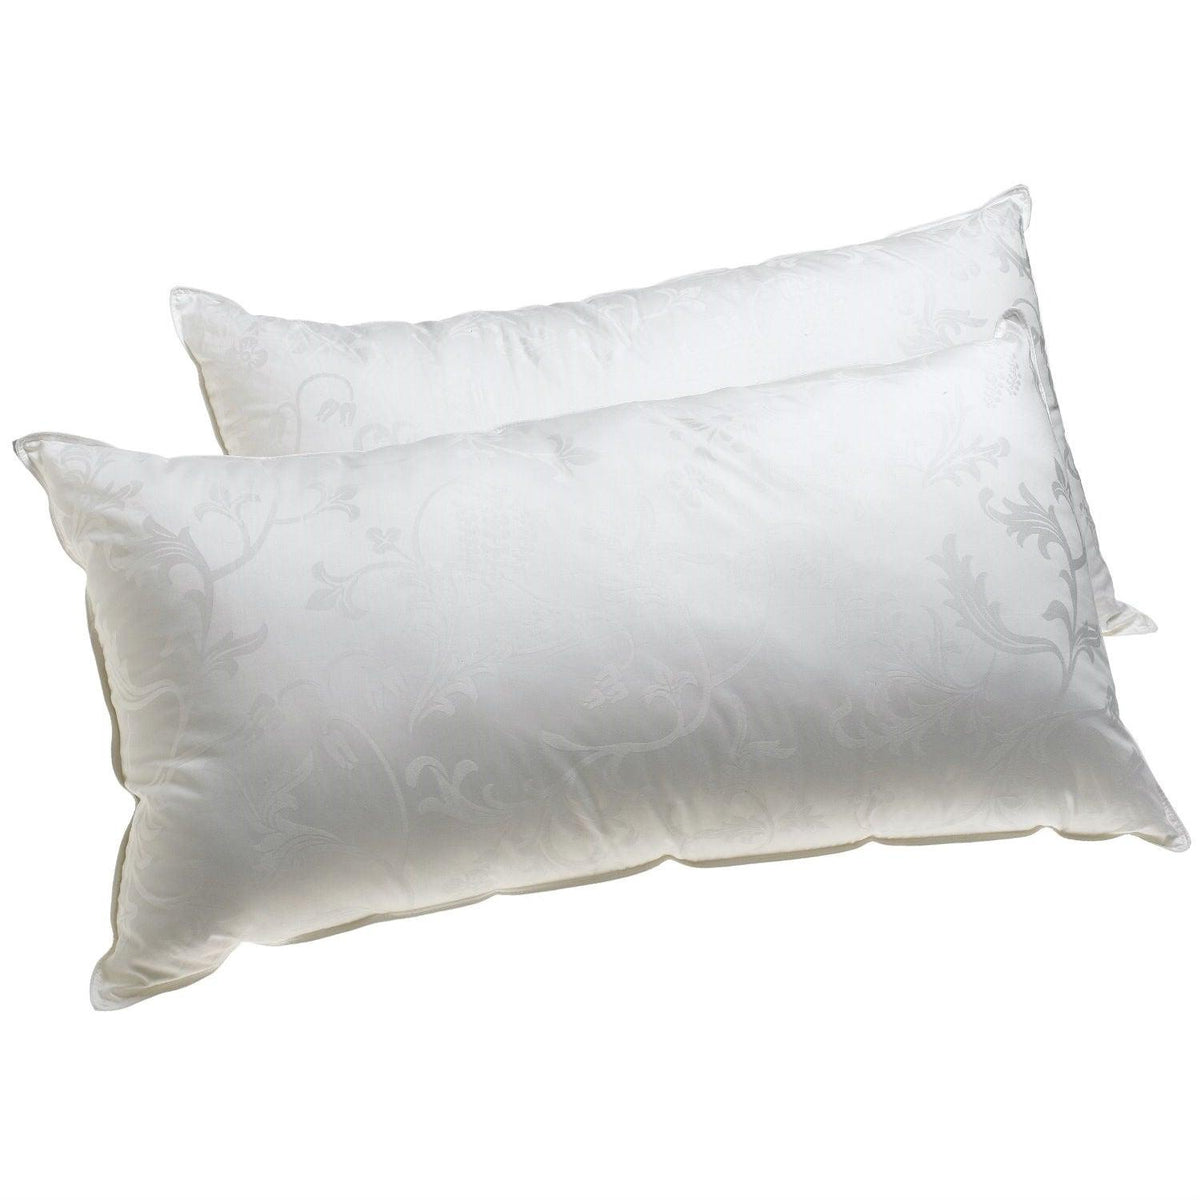 Set of 2 - King size Hypoallergenic Pillows with Gel Fiber Fill